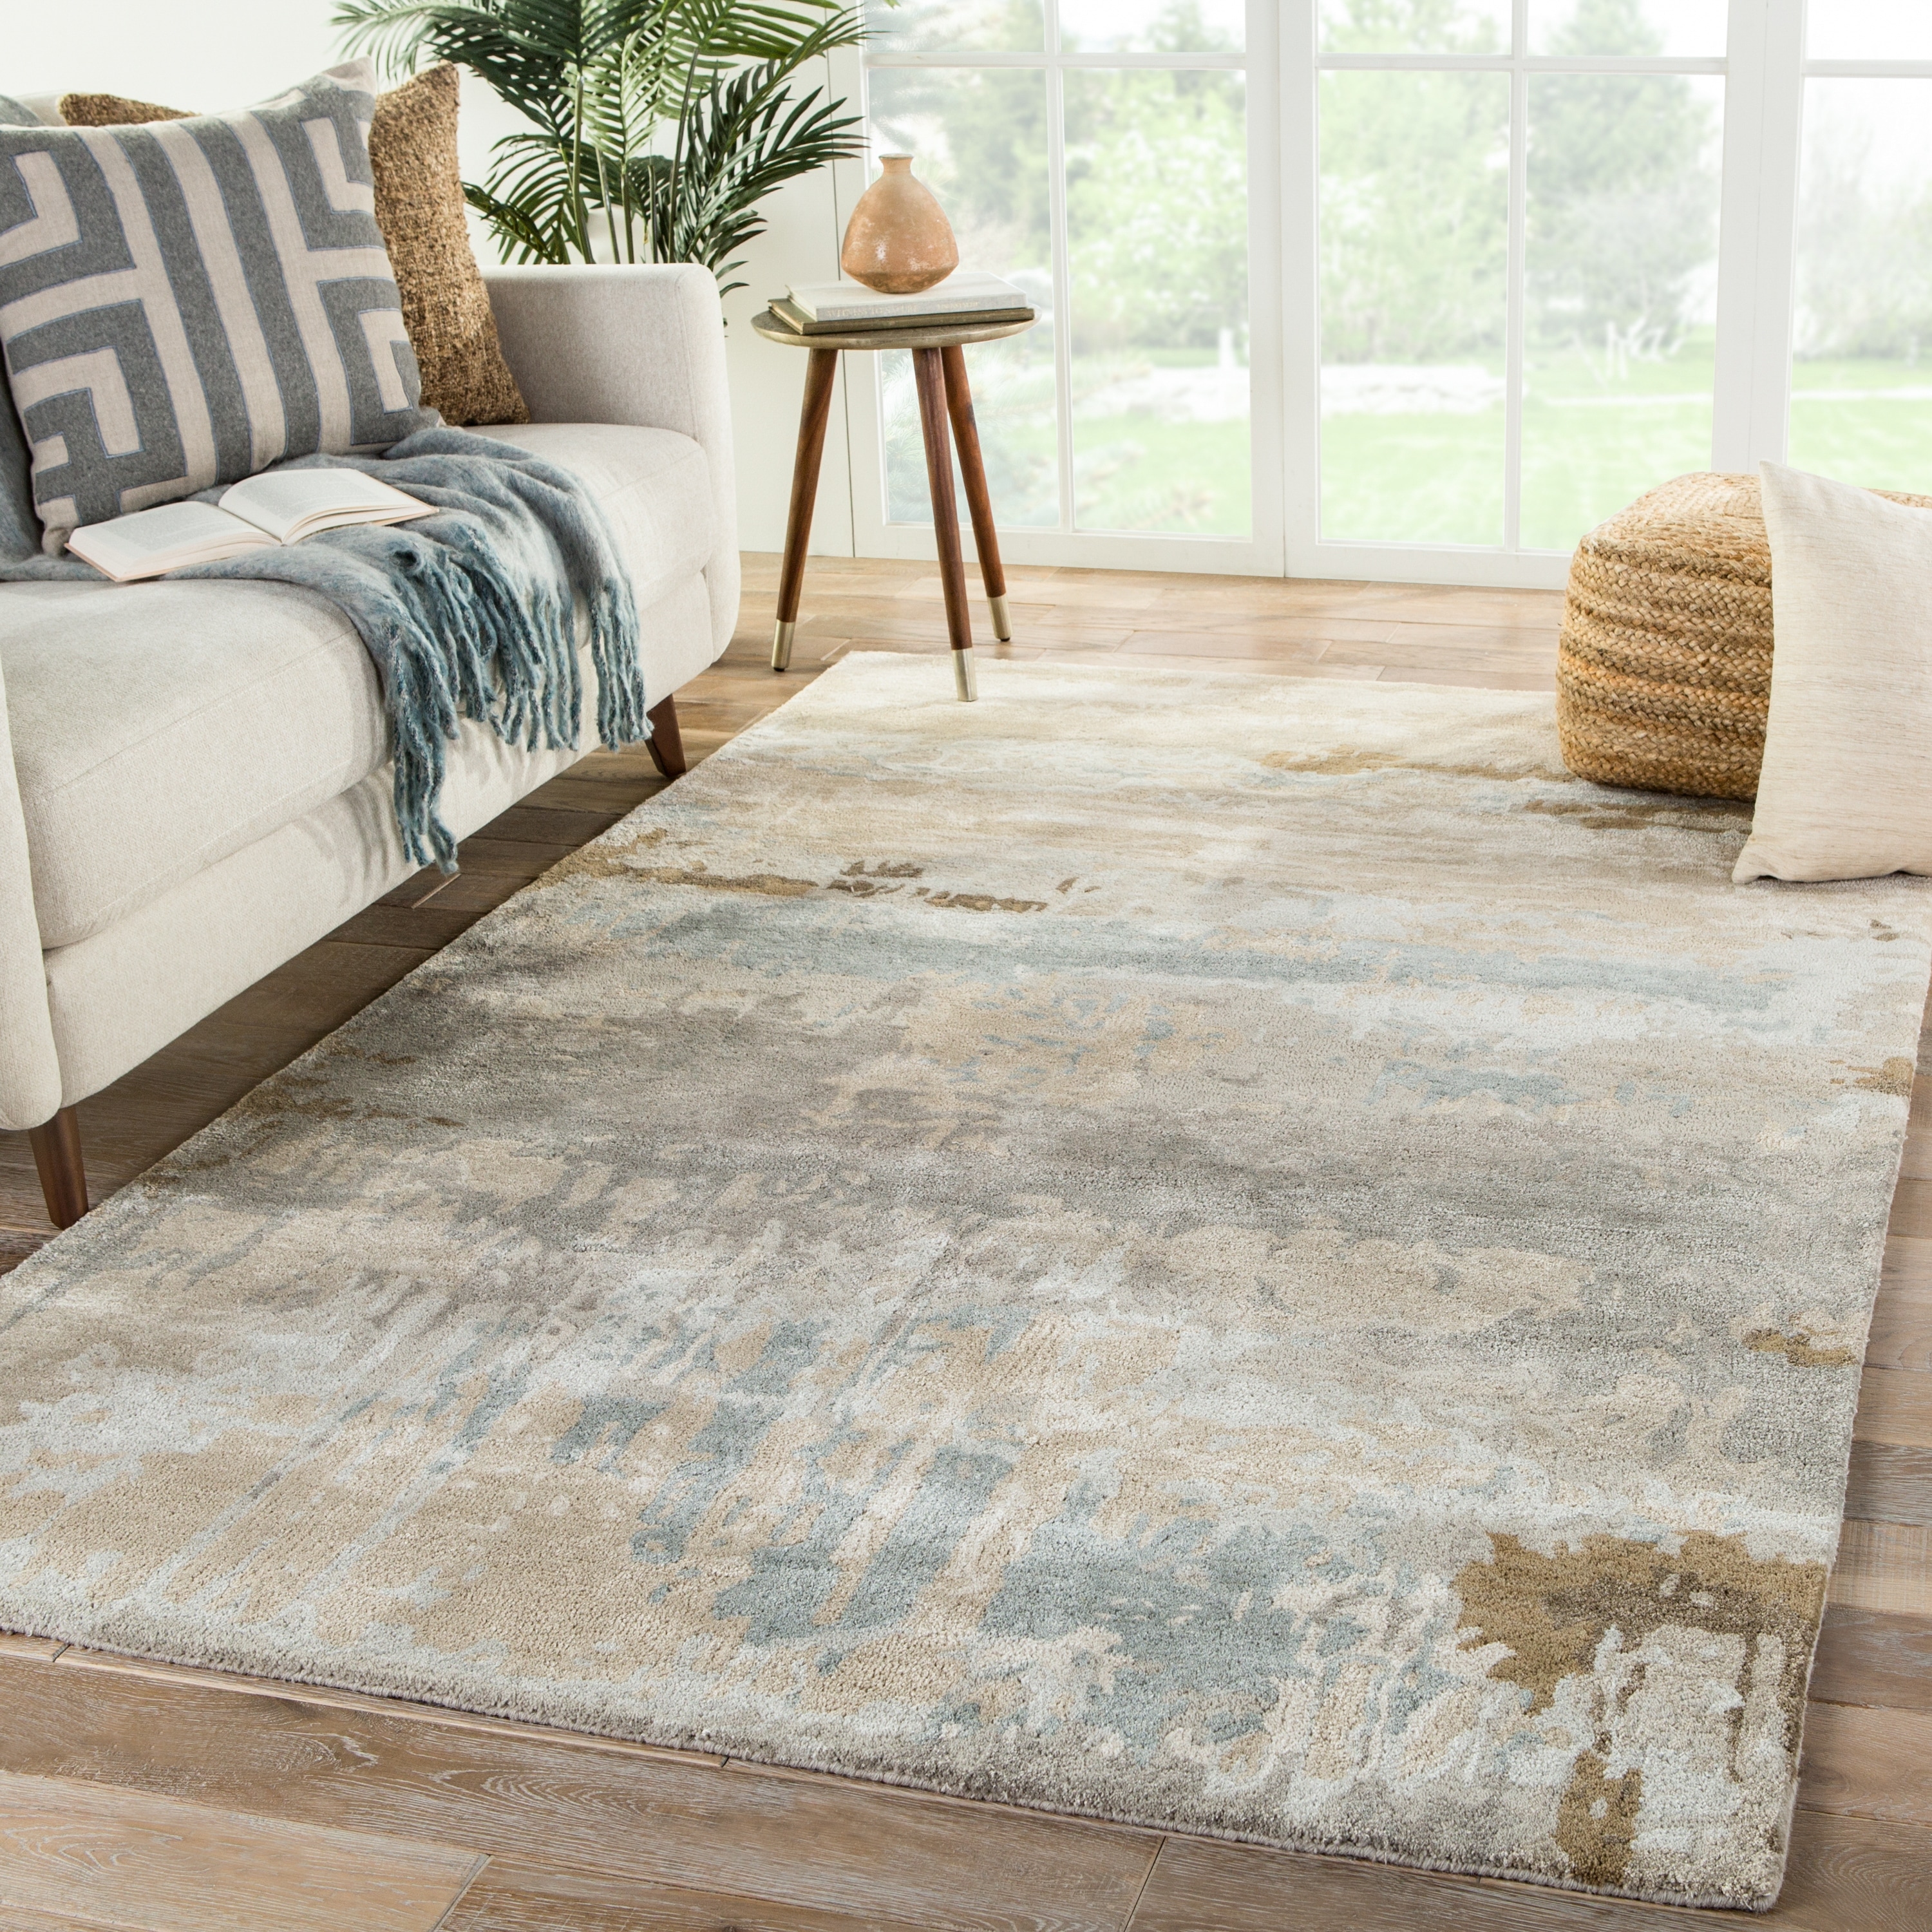 Contract Braided Felt Gray - Brown Rug from the Felt Rugs collection at  Modern Area Rugs